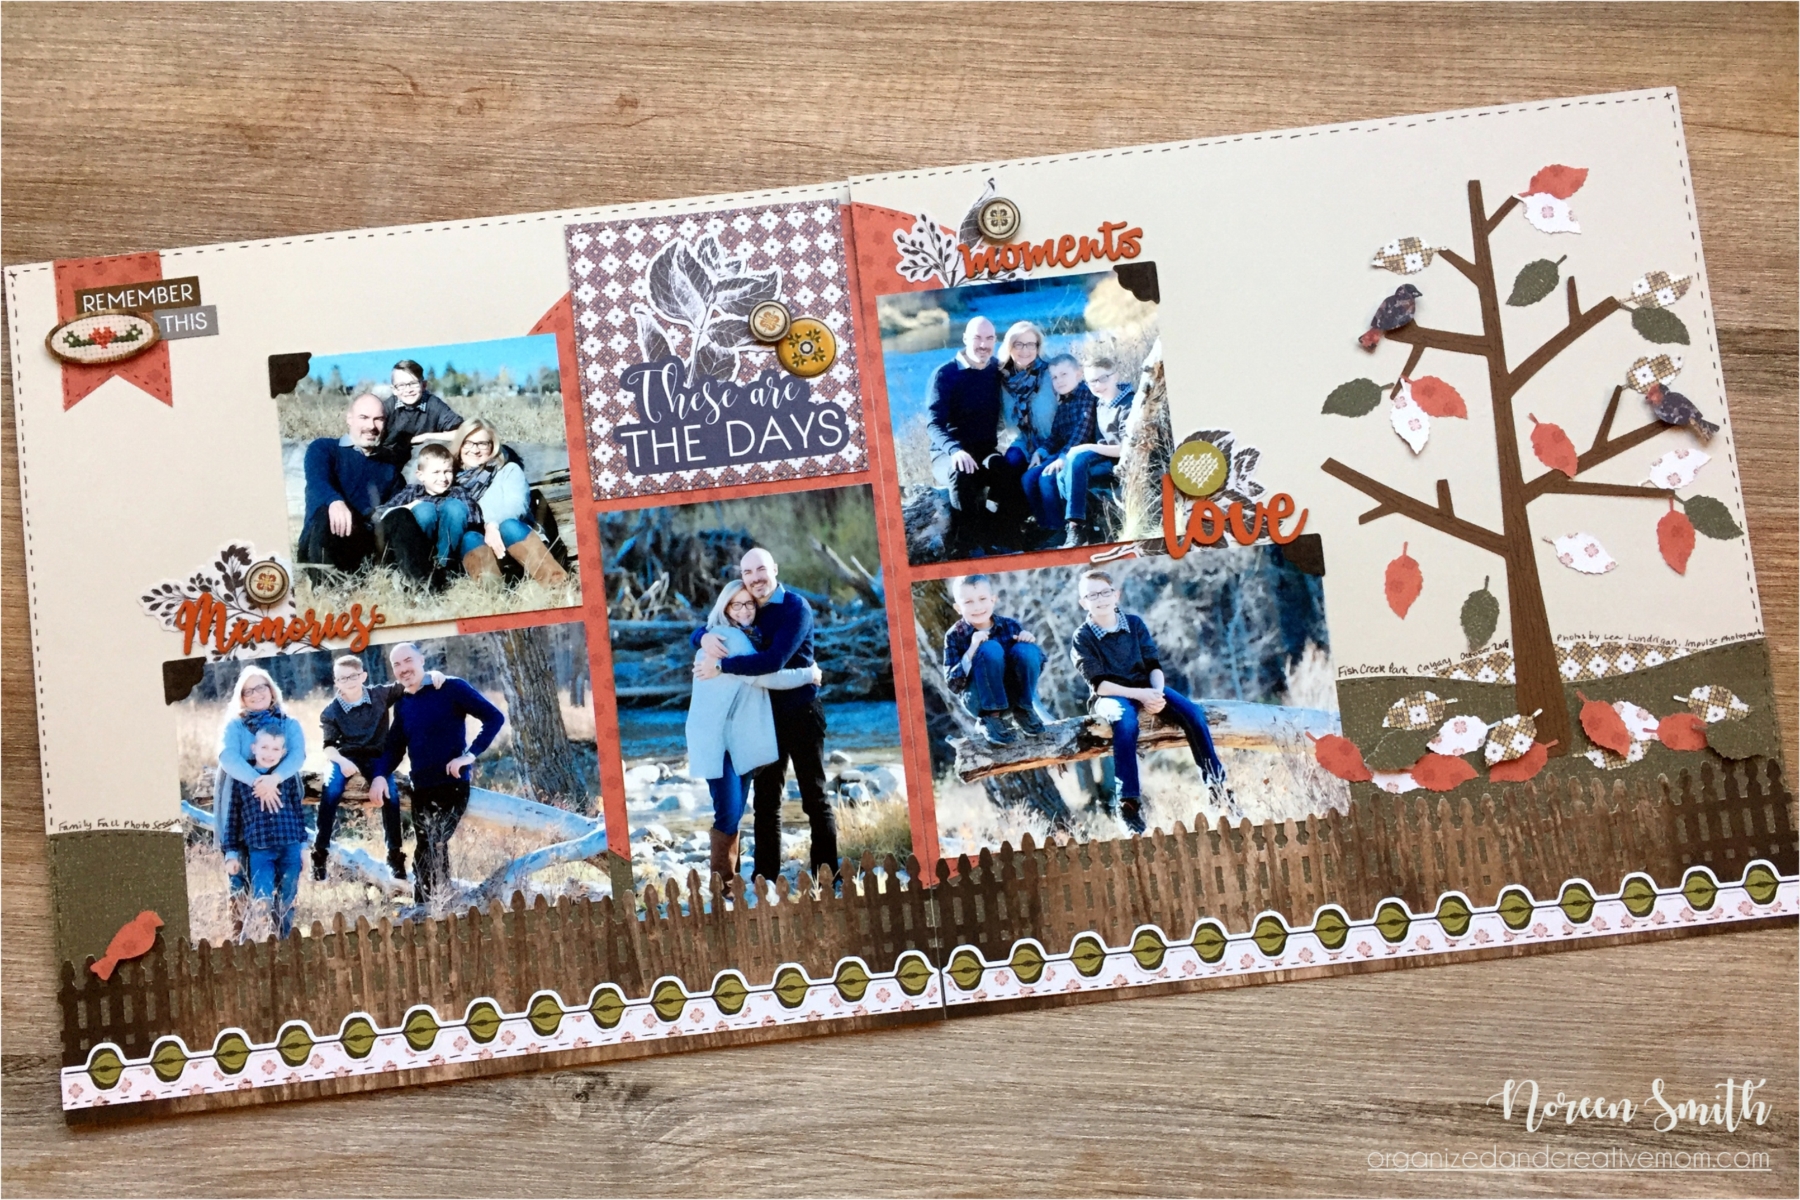 Creative Memories | Countryside Comforts Collection | Scrapbooking | Designed by Noreen Smith | Creative Scrapbooker Magazine